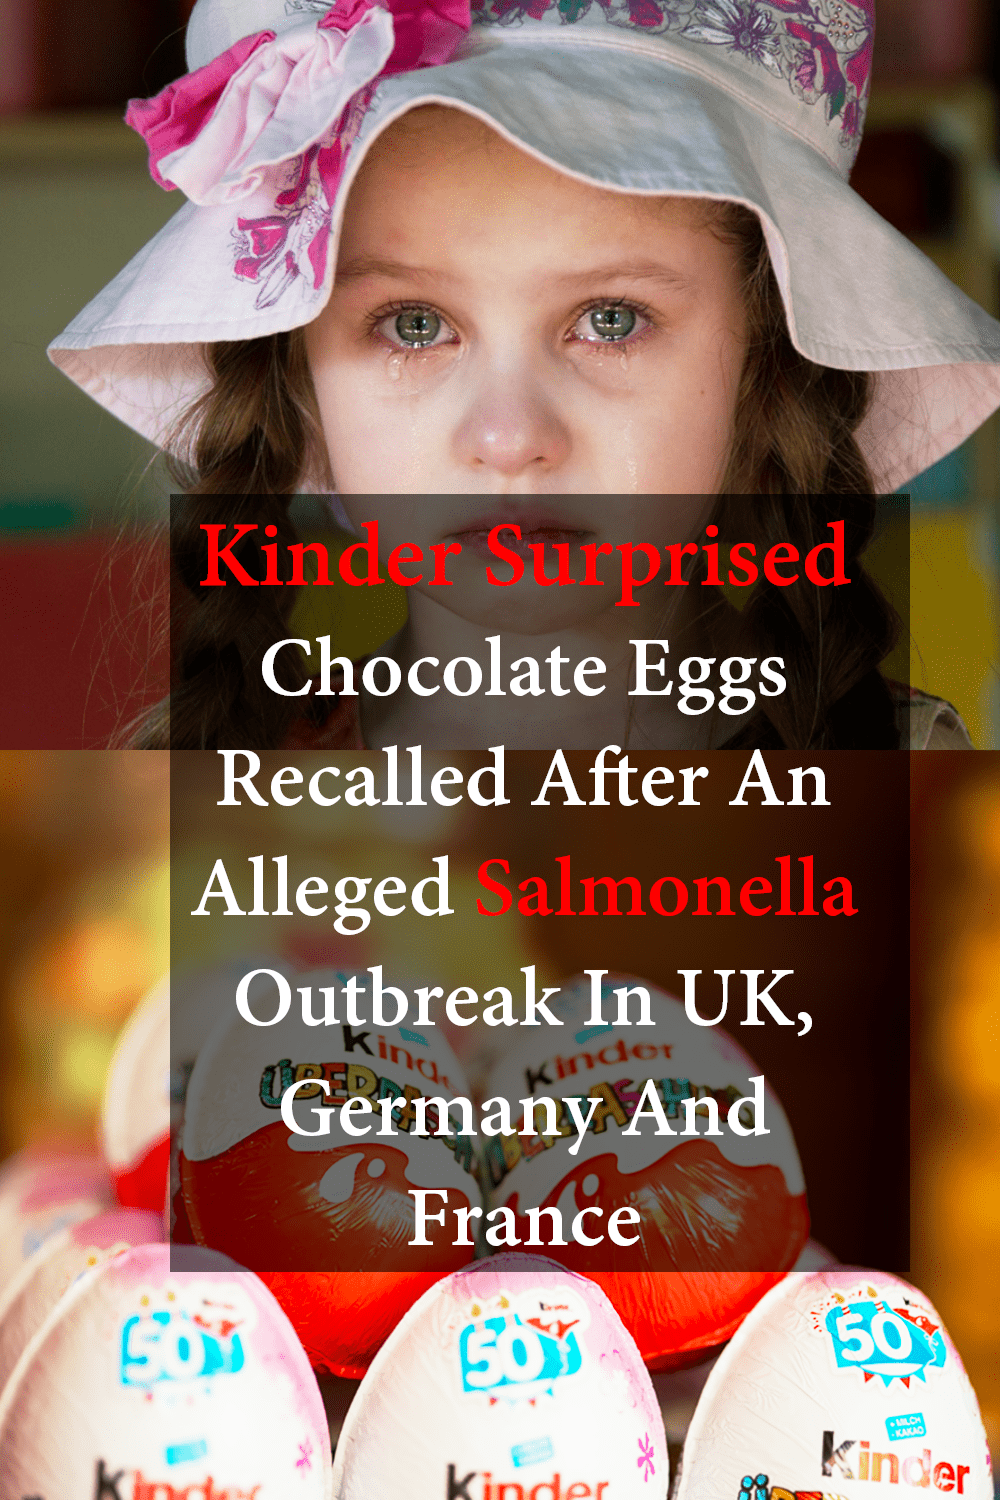 Kinder Surprised Chocolate Eggs Recalled After An Alleged Salmonella Outbreak In UK, Germany And France 